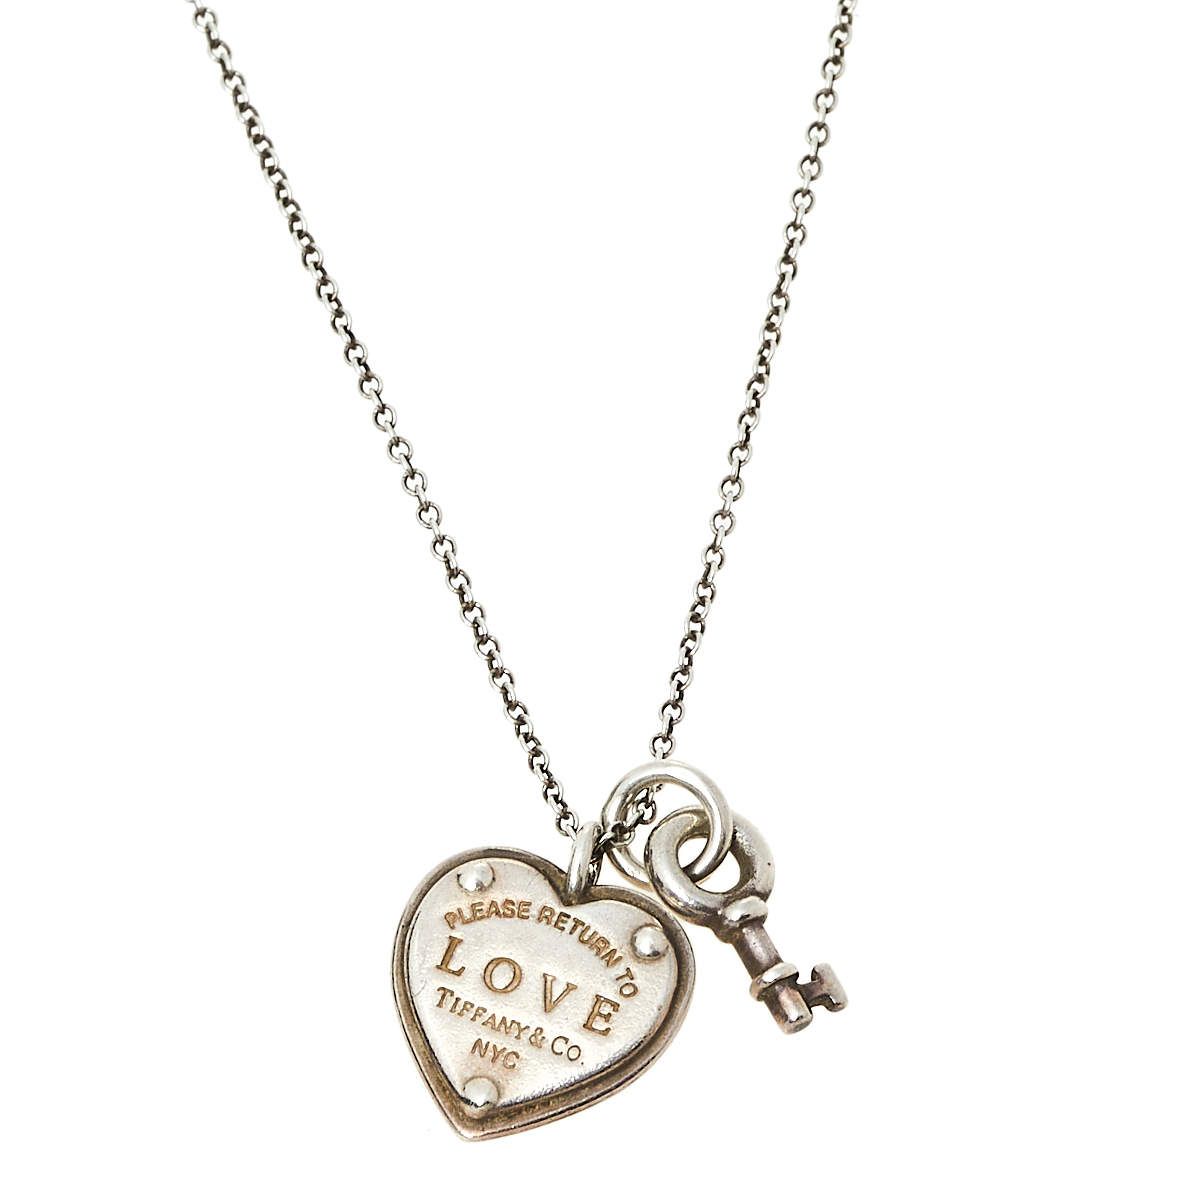 Are Tiffany Heart Necklaces Still in Style? – Fetchthelove Inc.